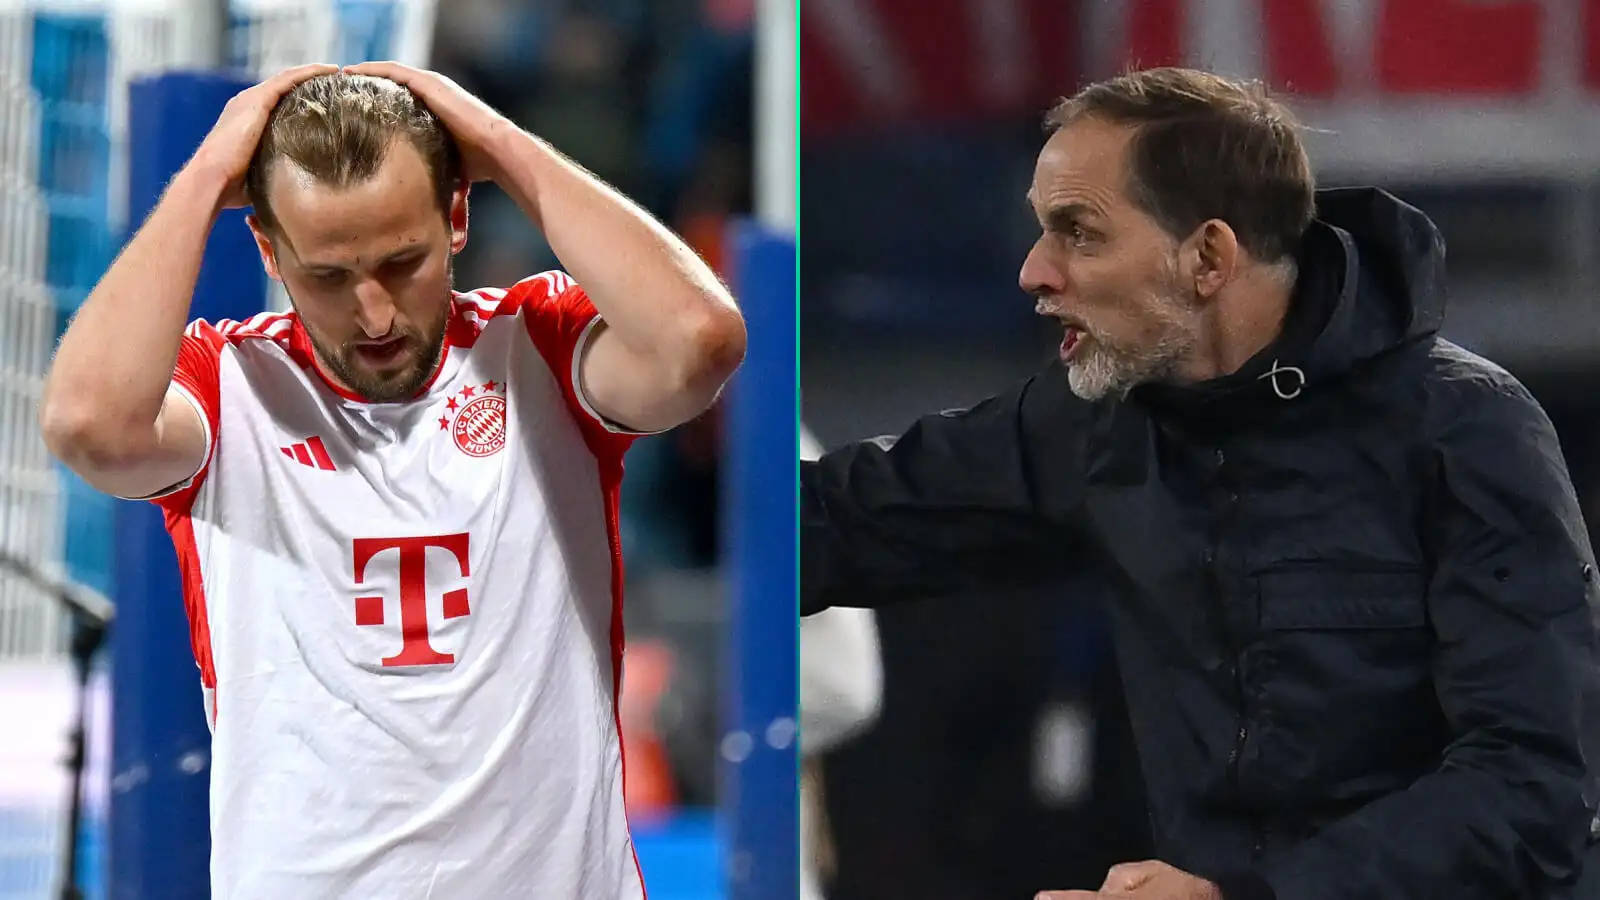 Man Utd, Chelsea watch on as Bayern Munich dressing room fury emerges, with Harry Kane 'at the centre'